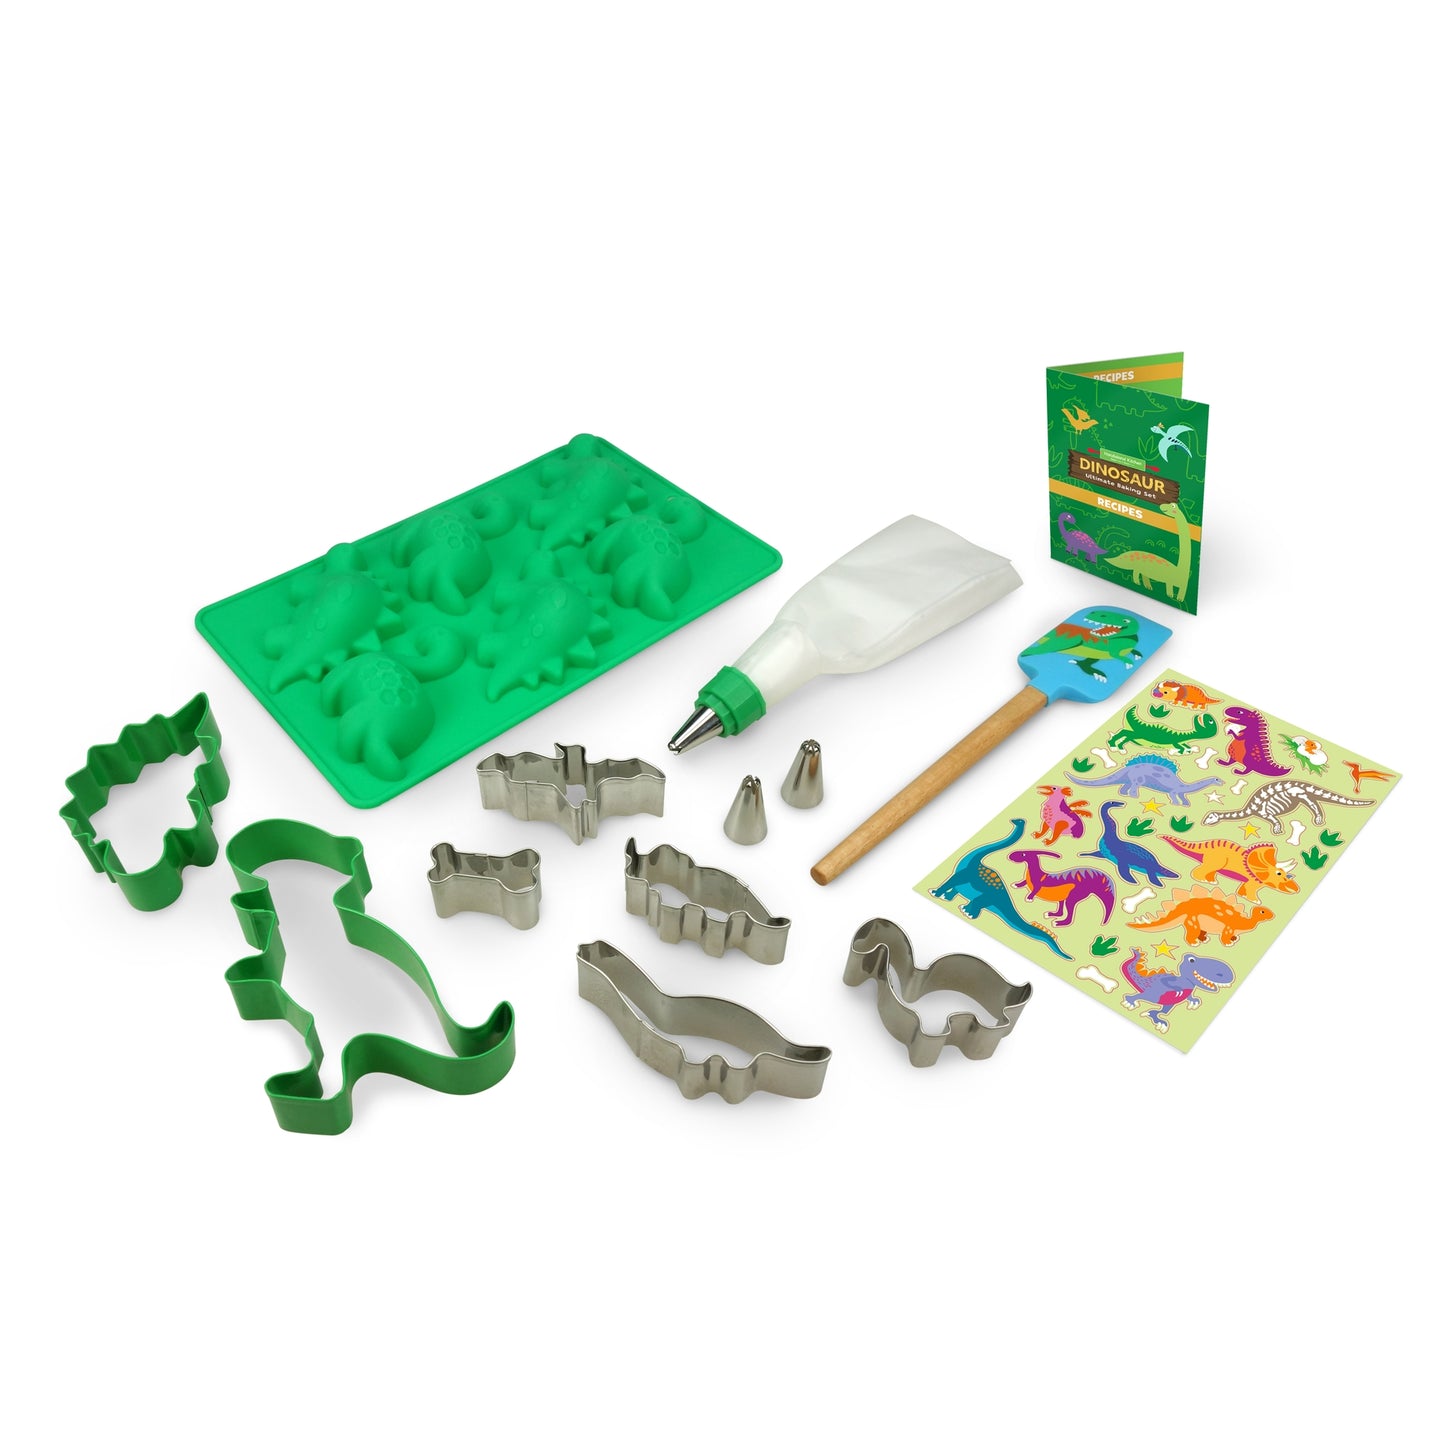 Dinosaur Baking Kit for kids product contents